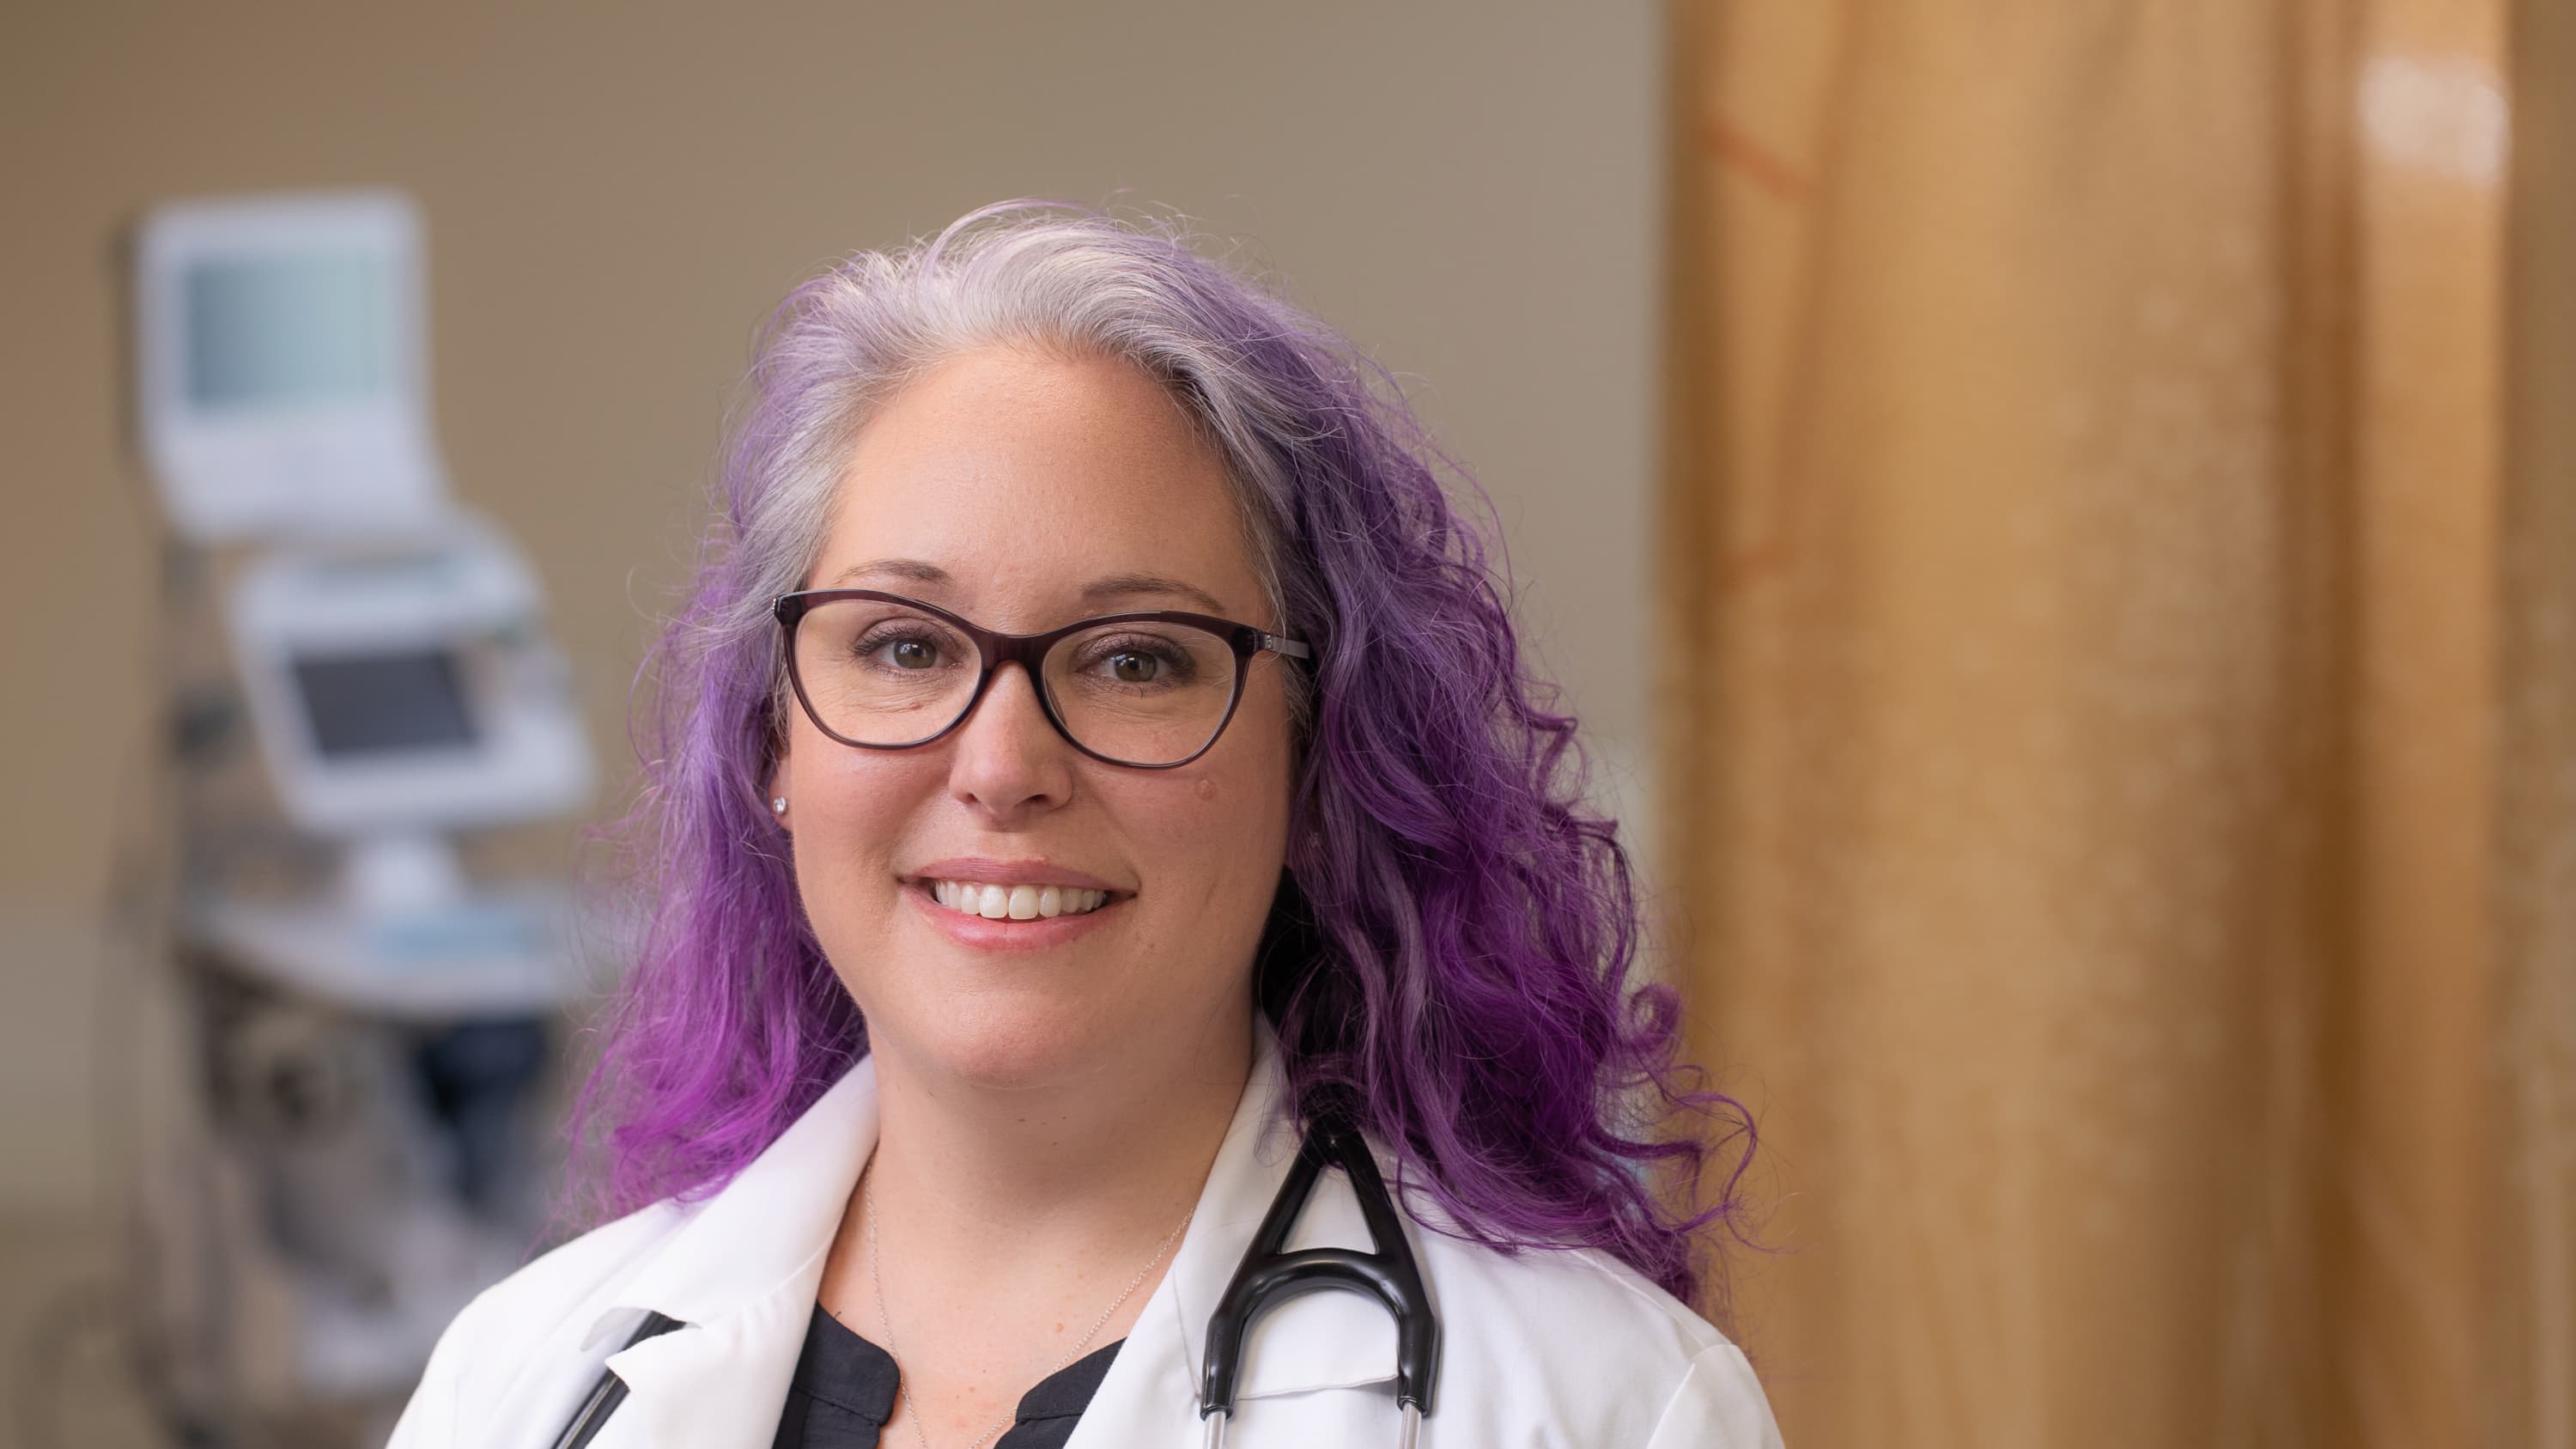 Jennifer Possick, MD, who started the first multidisciplinary post-COVID-19 recovery clinic in Connecticut